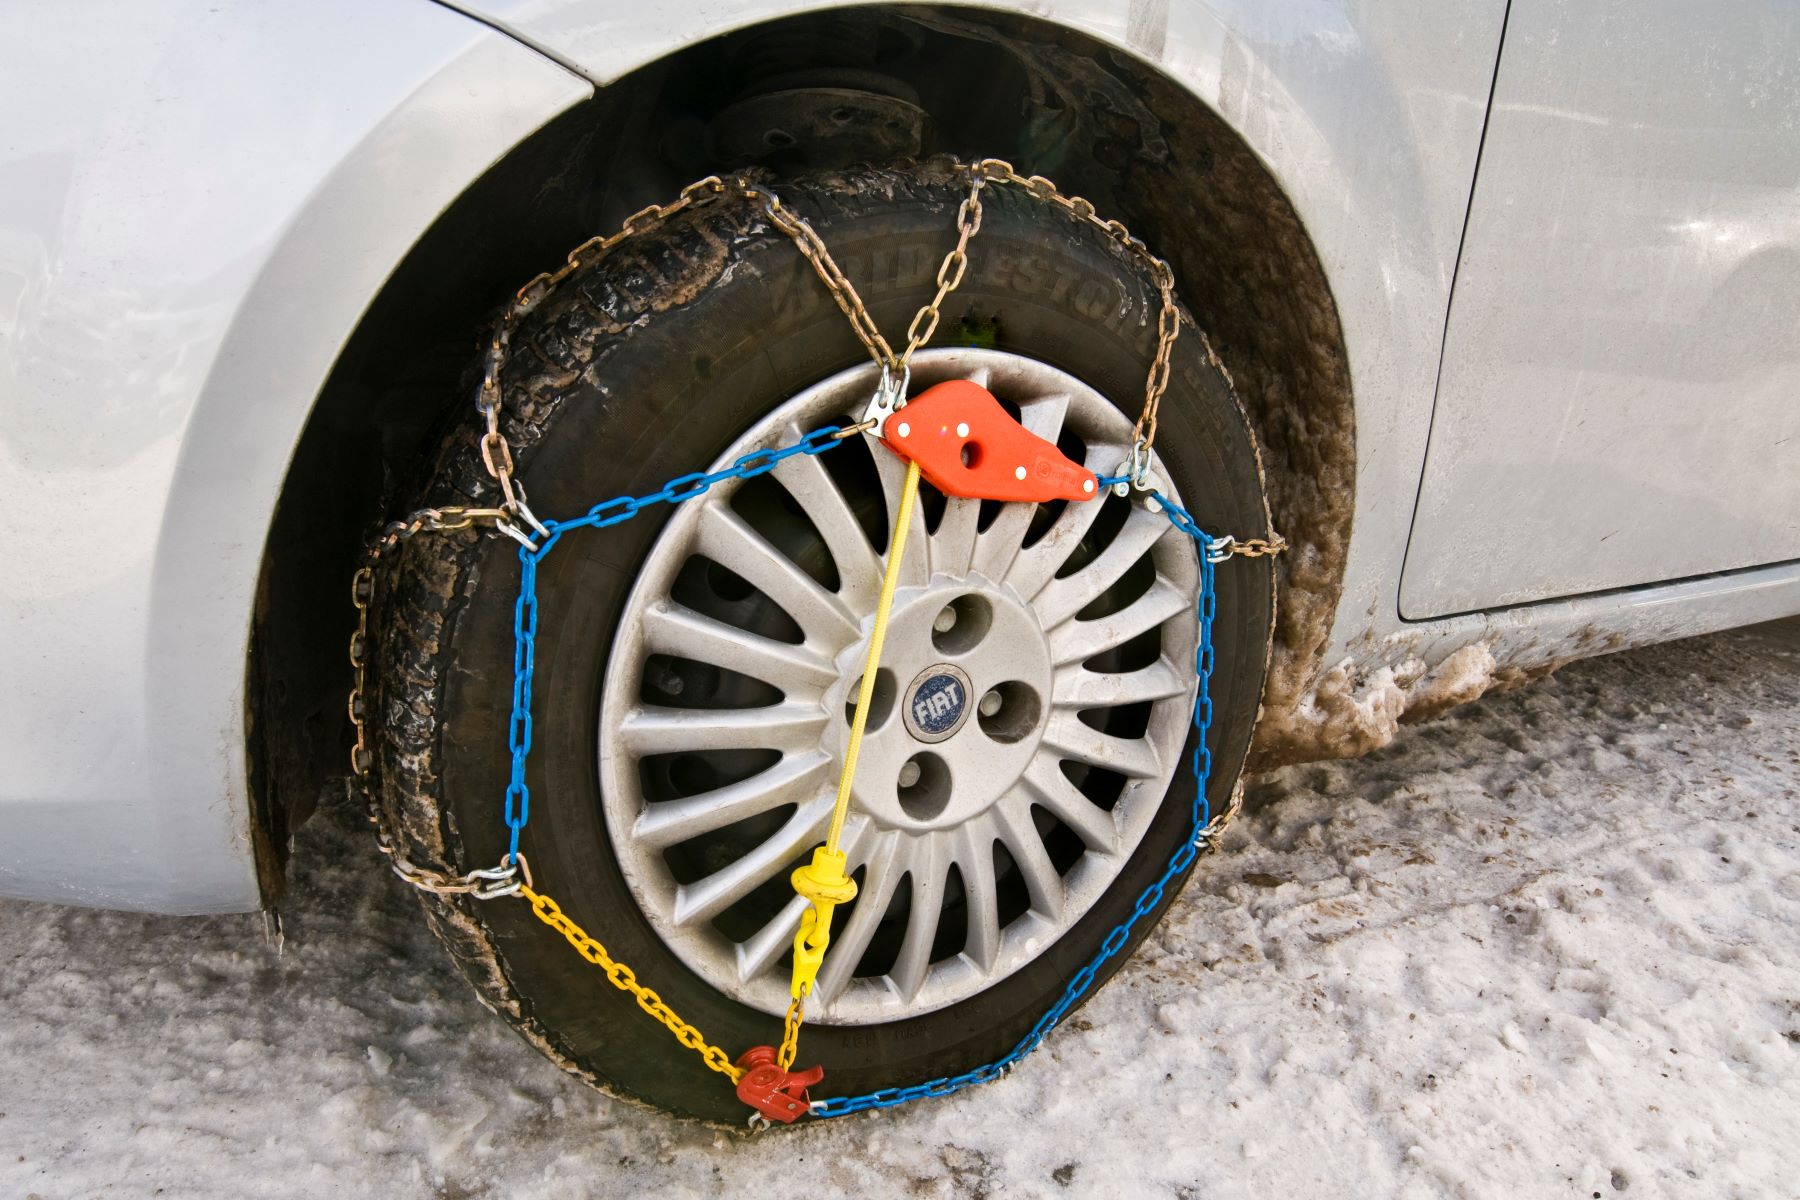 A Fiat car with a tire chain for winter and snowy weather driving conditions